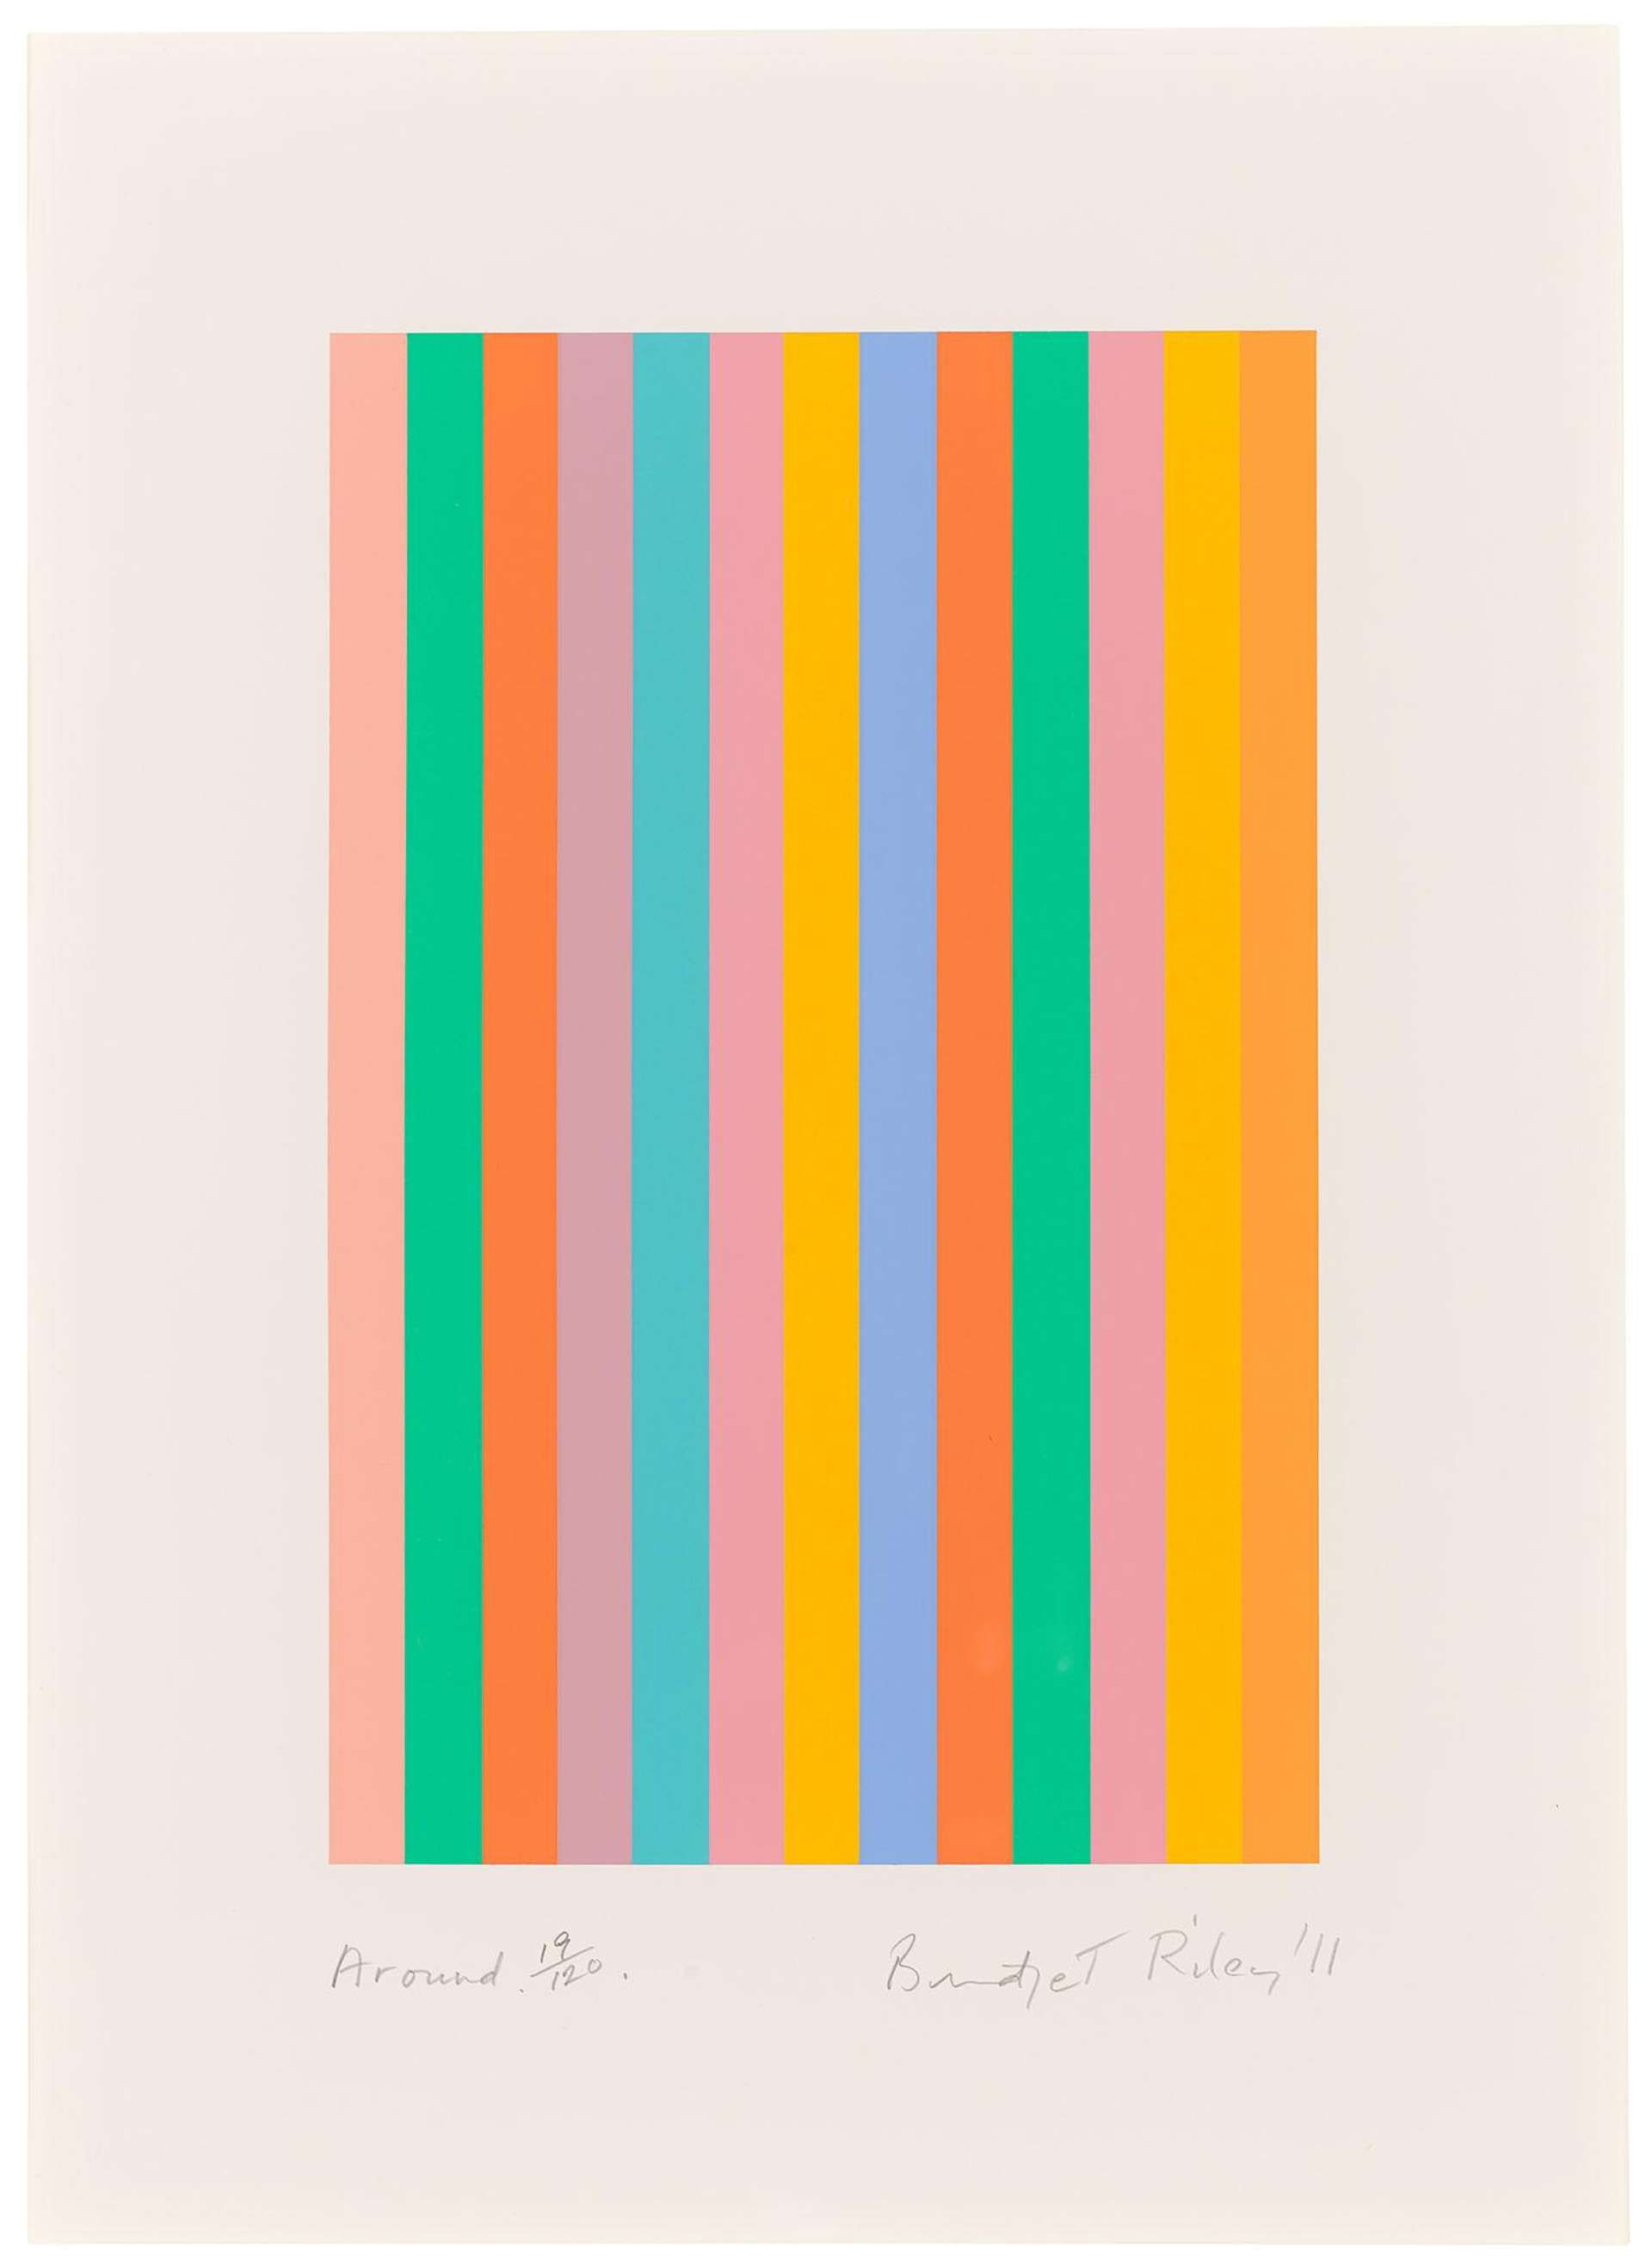 The print depicts a composition of successive vertical stripes rendered in bright colours. Repetition characterises this print as the lines all appear to be identical in shape and size. Each line is a different colour and the colours Riley employs in this print are bright, warm and vibrant.